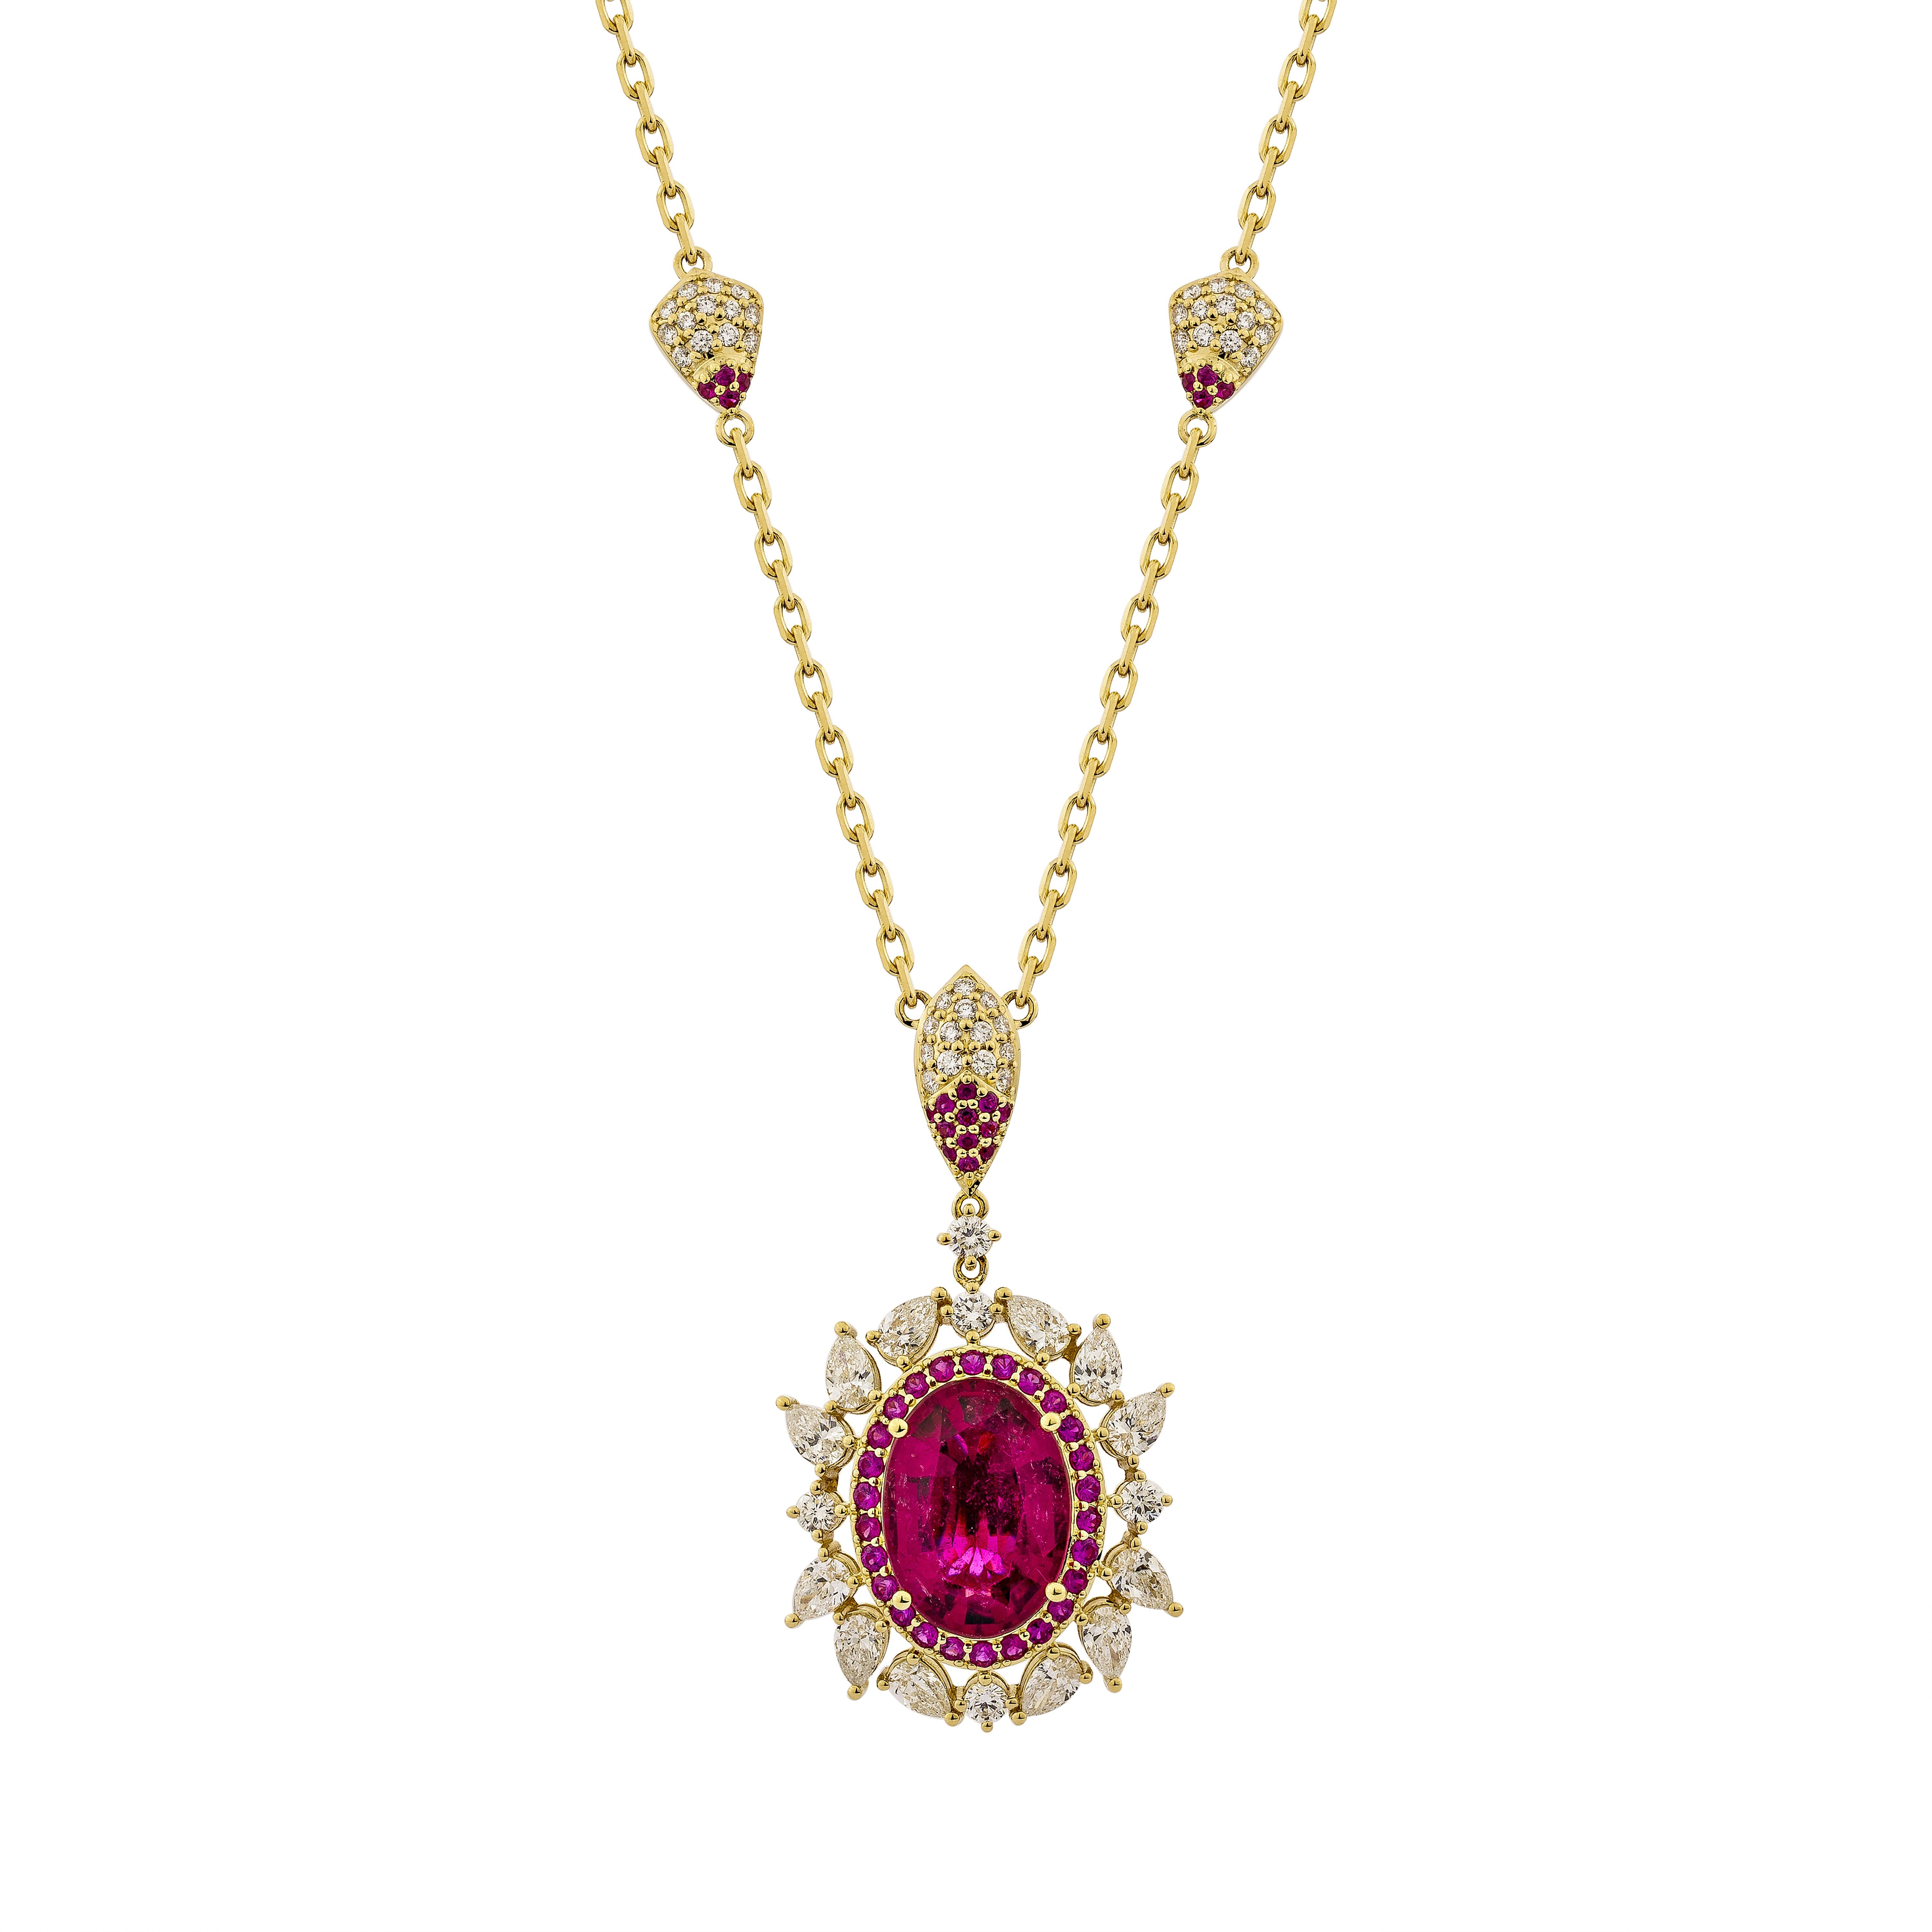 Contemporary 7.994 Carat Rubellite Necklace in 18KYG with Ruby and White Diamond. For Sale